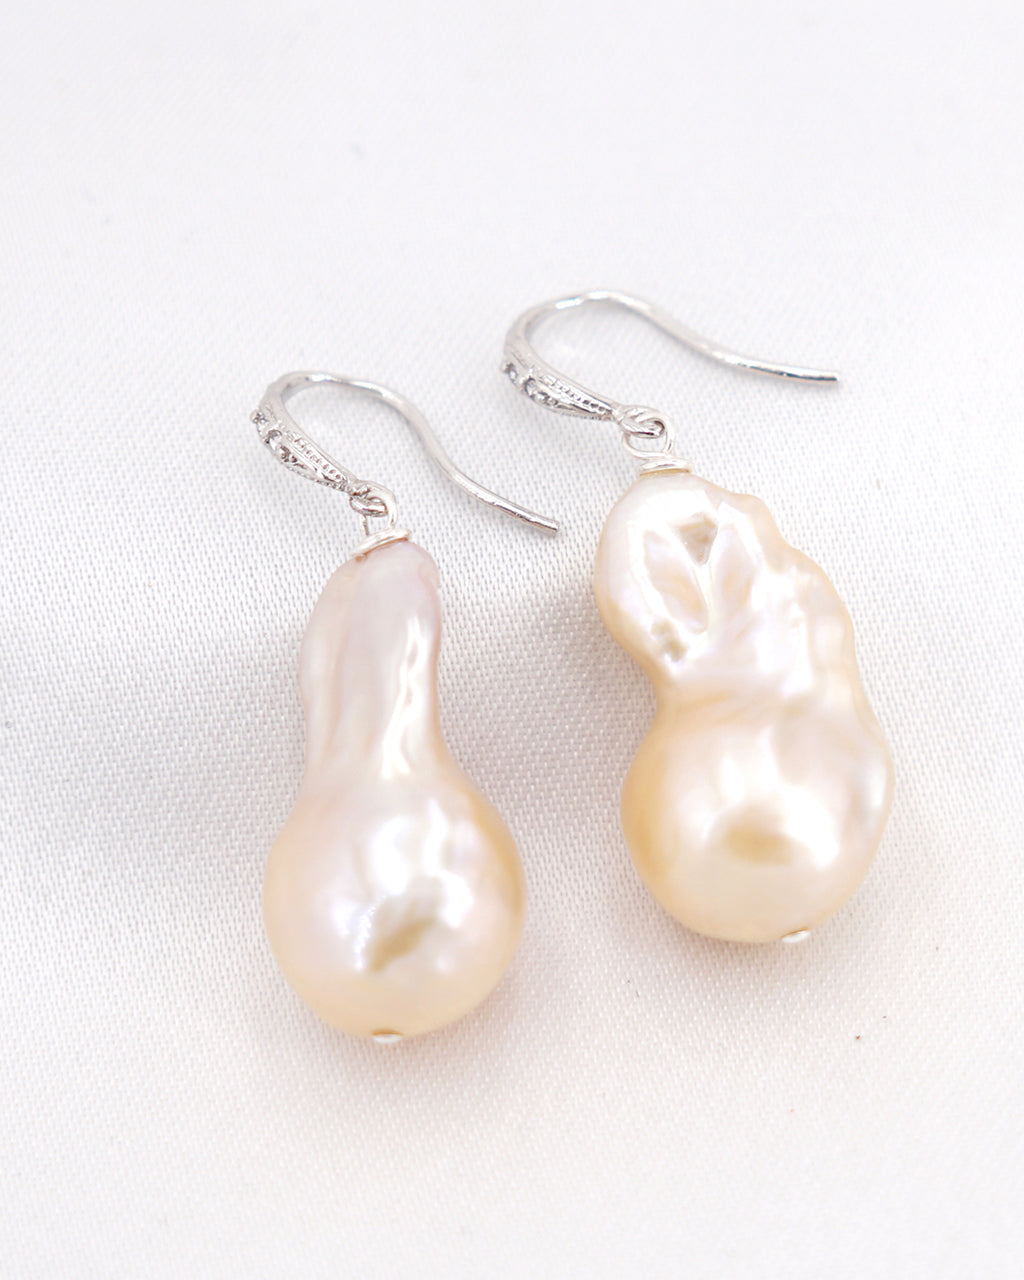 Baroque Pearl Earrings - Simple - Wedding Bridal Jewelry for Brides and Bridesmaids | Singapore